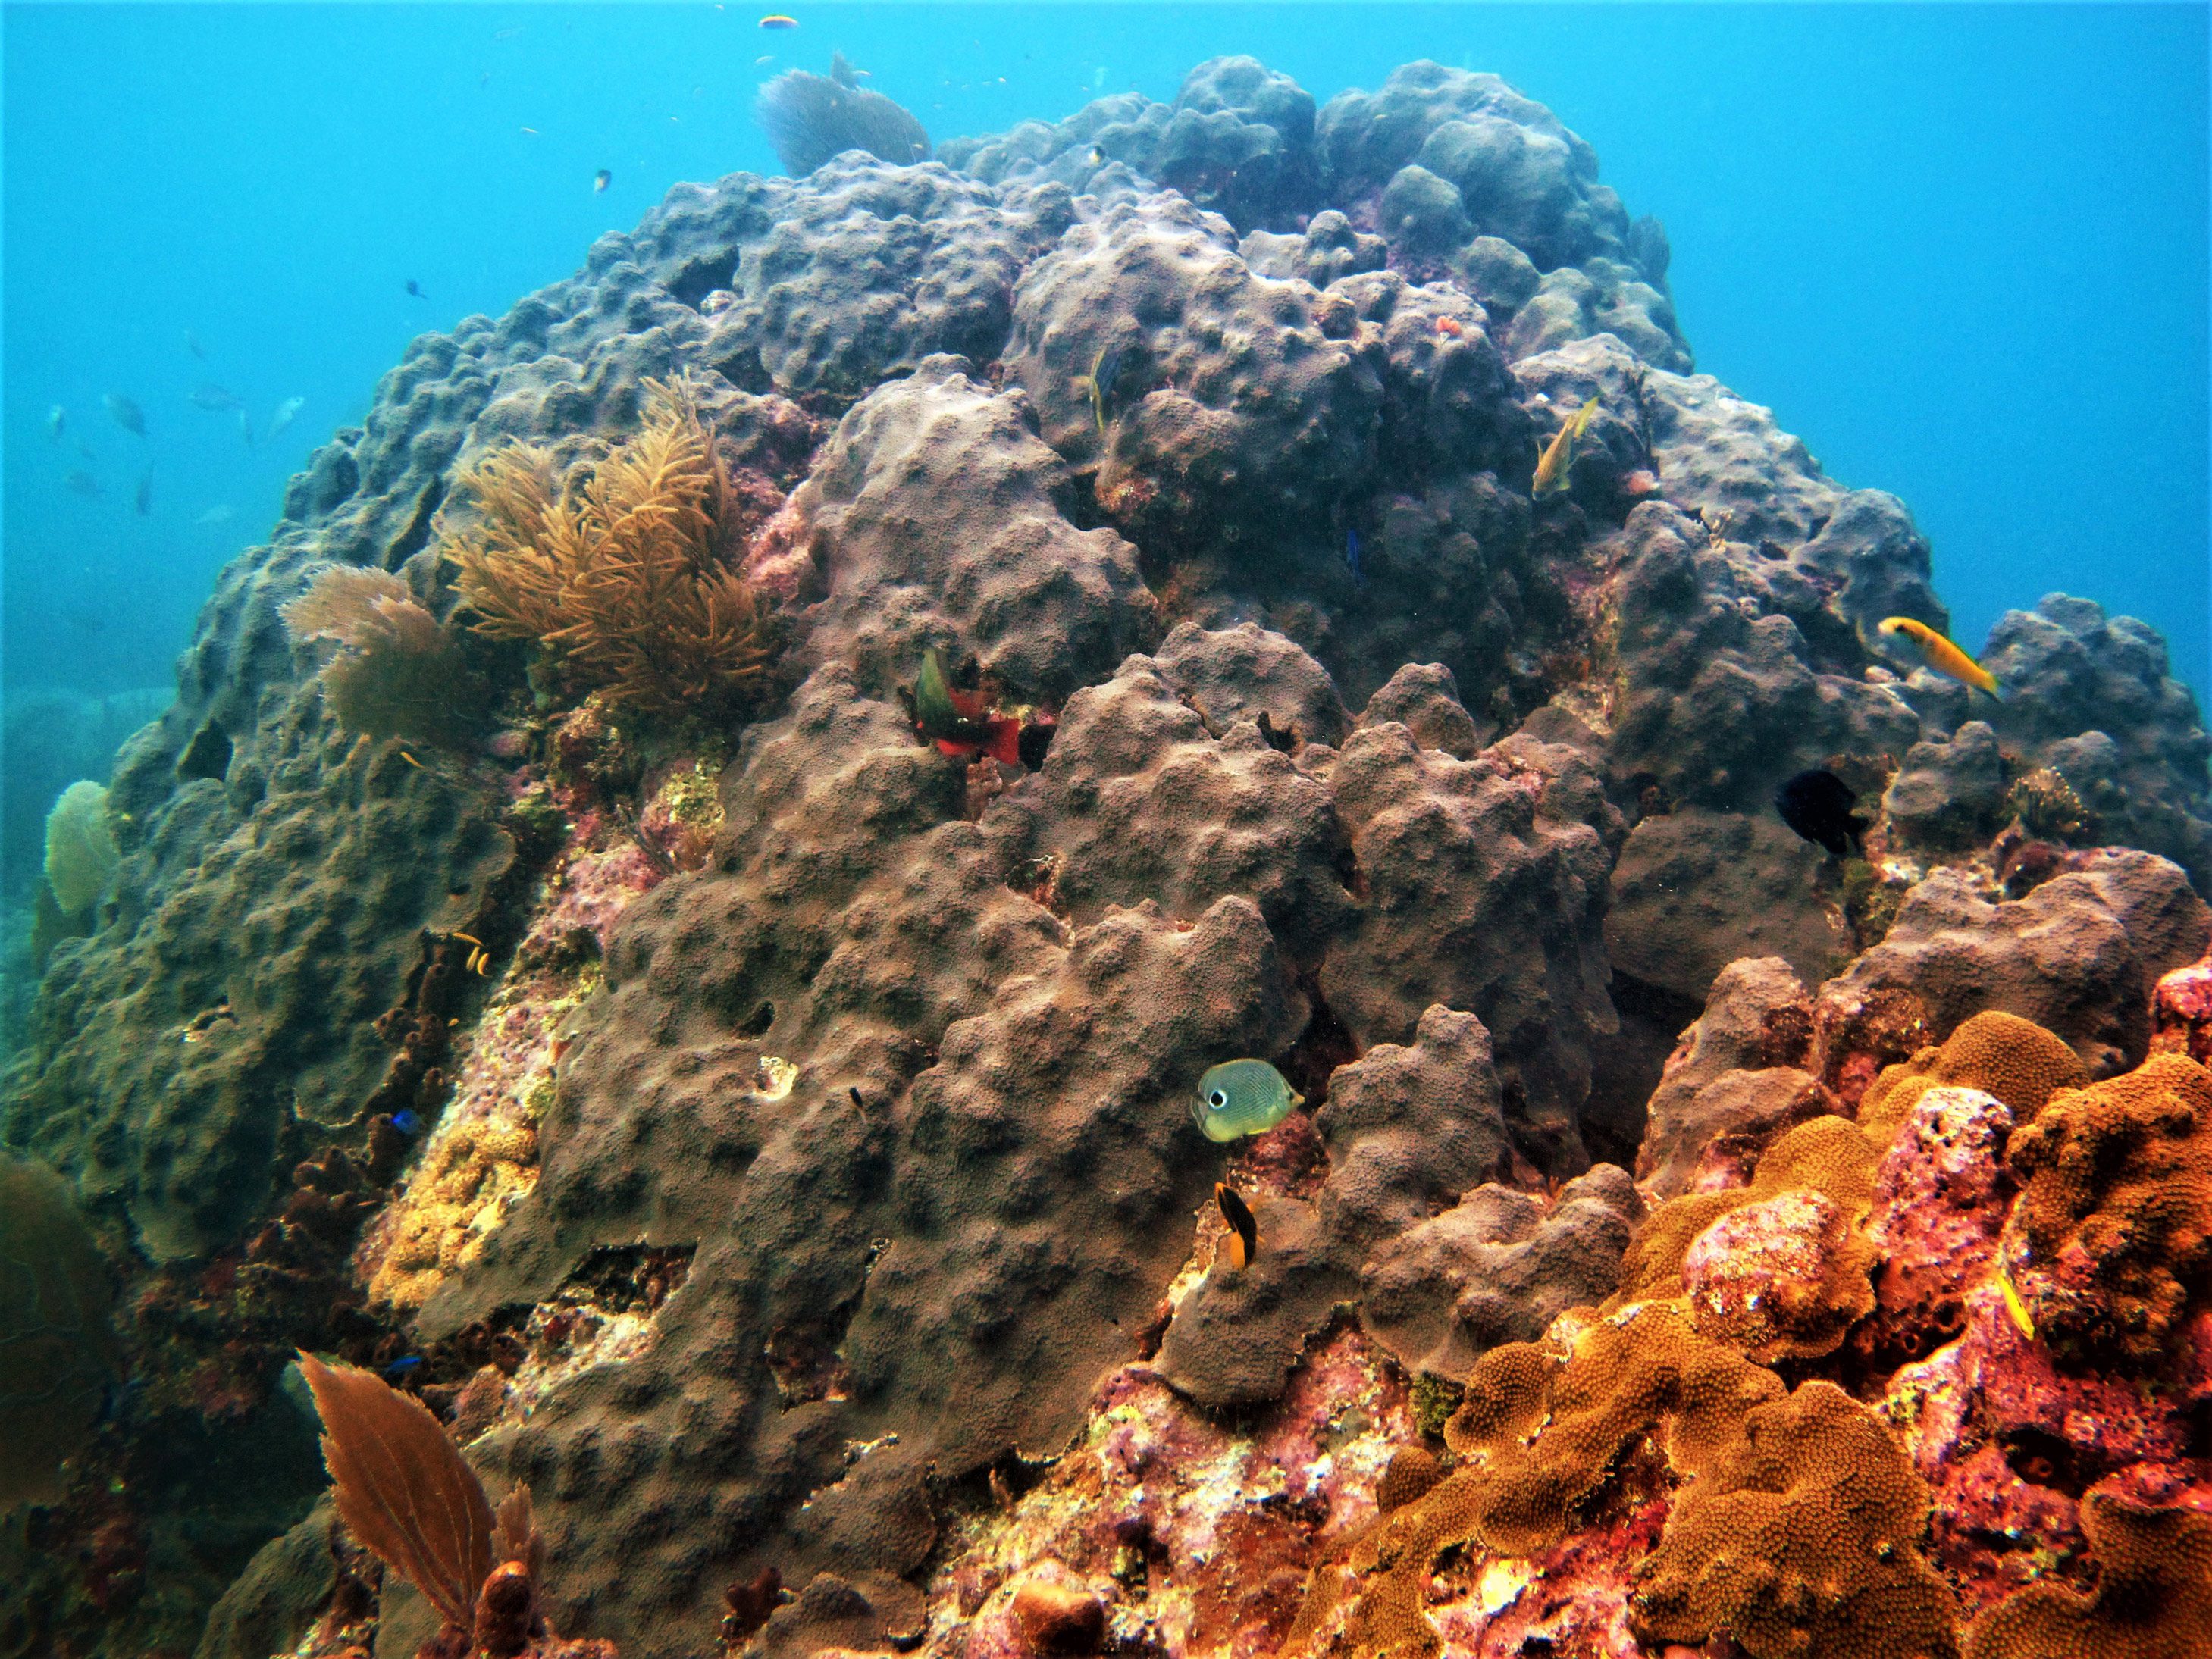 Threatened Corals in the Gulf of Mexico